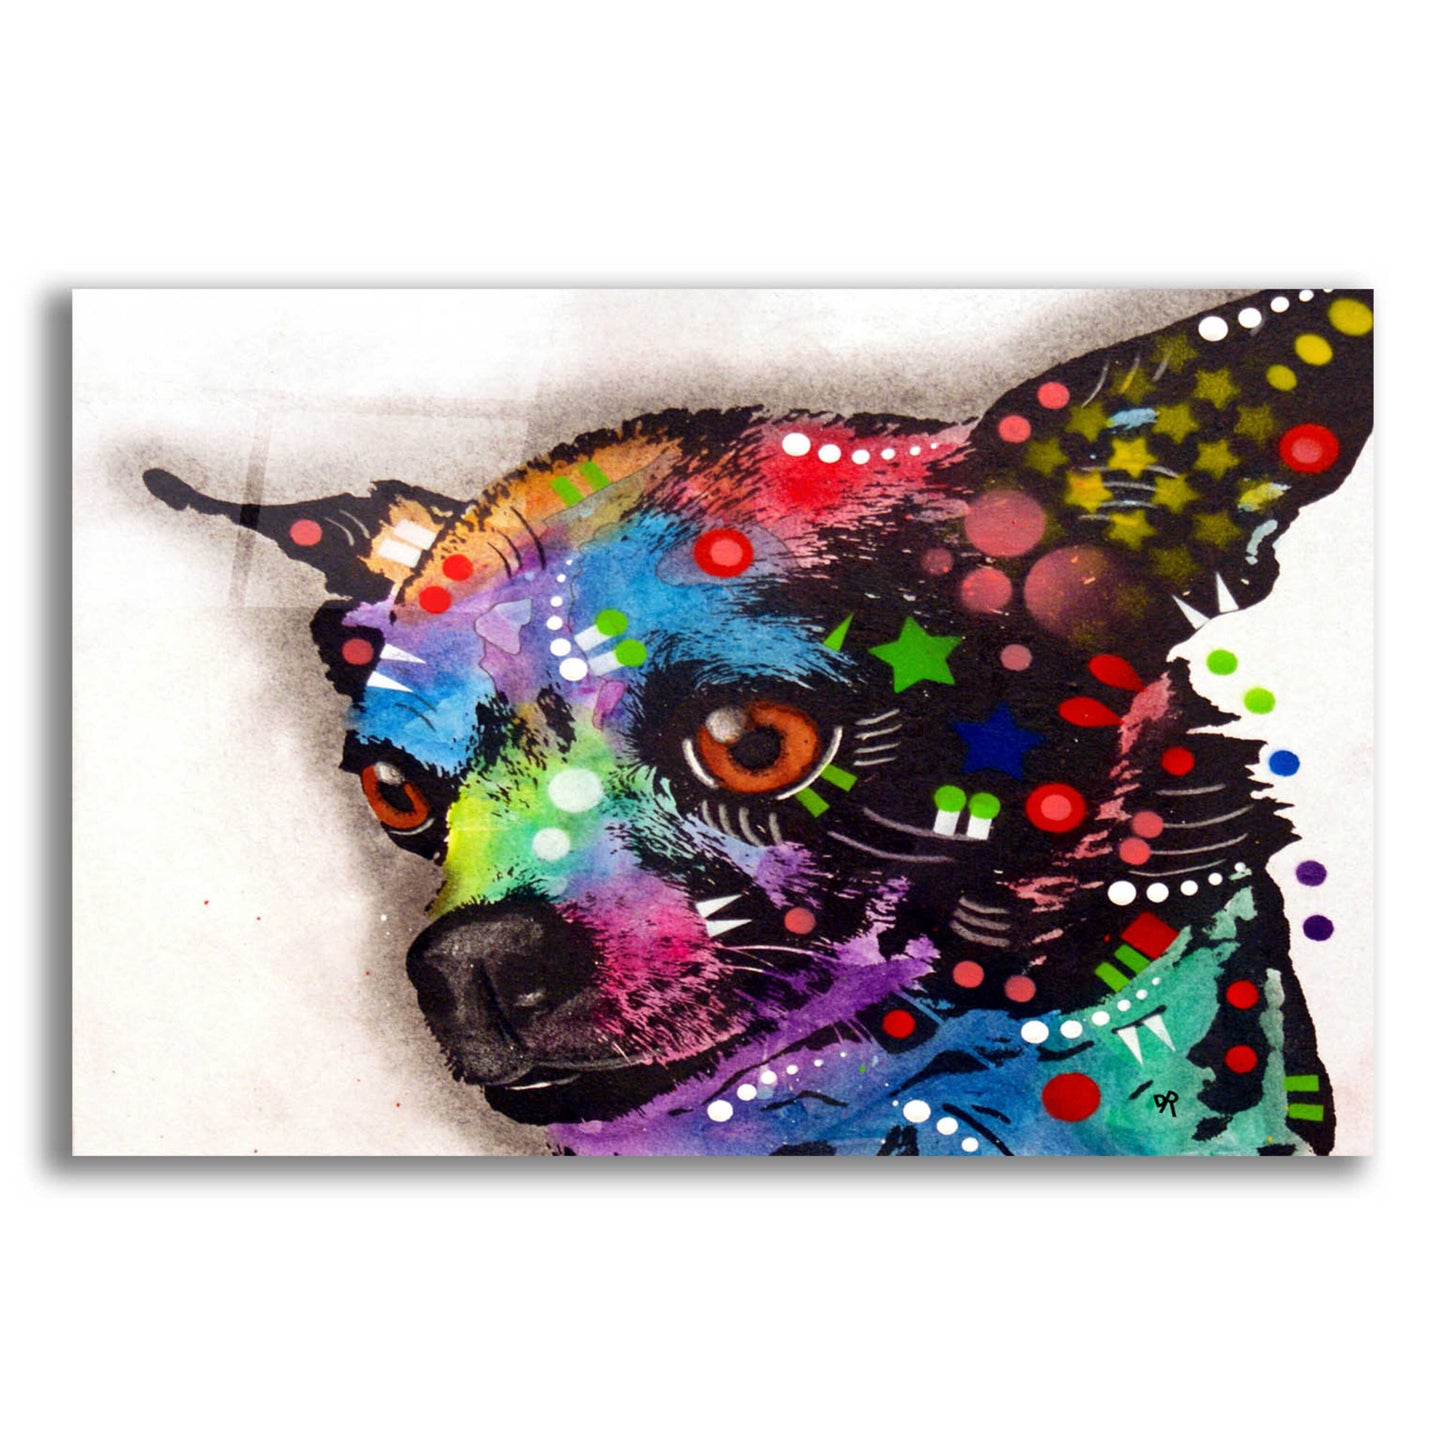 Epic Art 'CHICHI' by Dean Russo, Acrylic Glass Wall Art,24x16